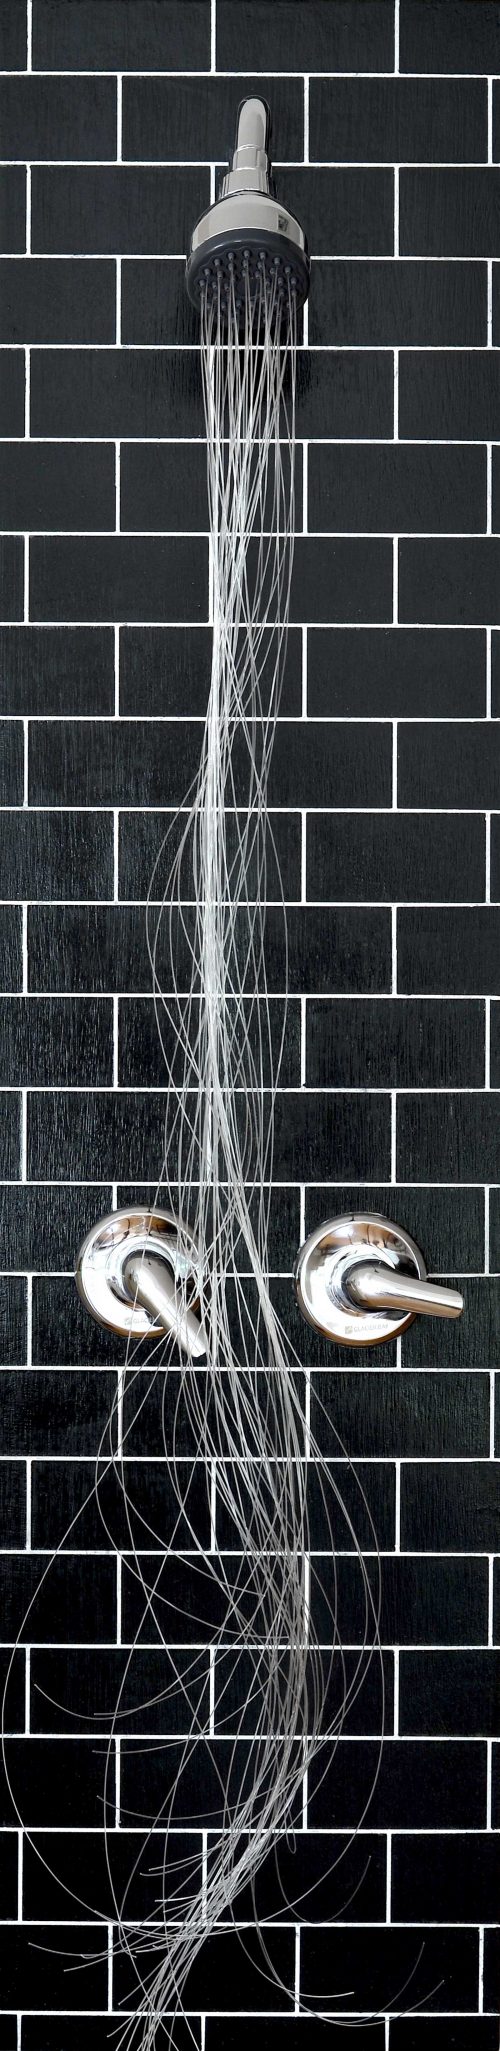 Long vertical image of a shower head with silver colored hair-like material hanging out of it